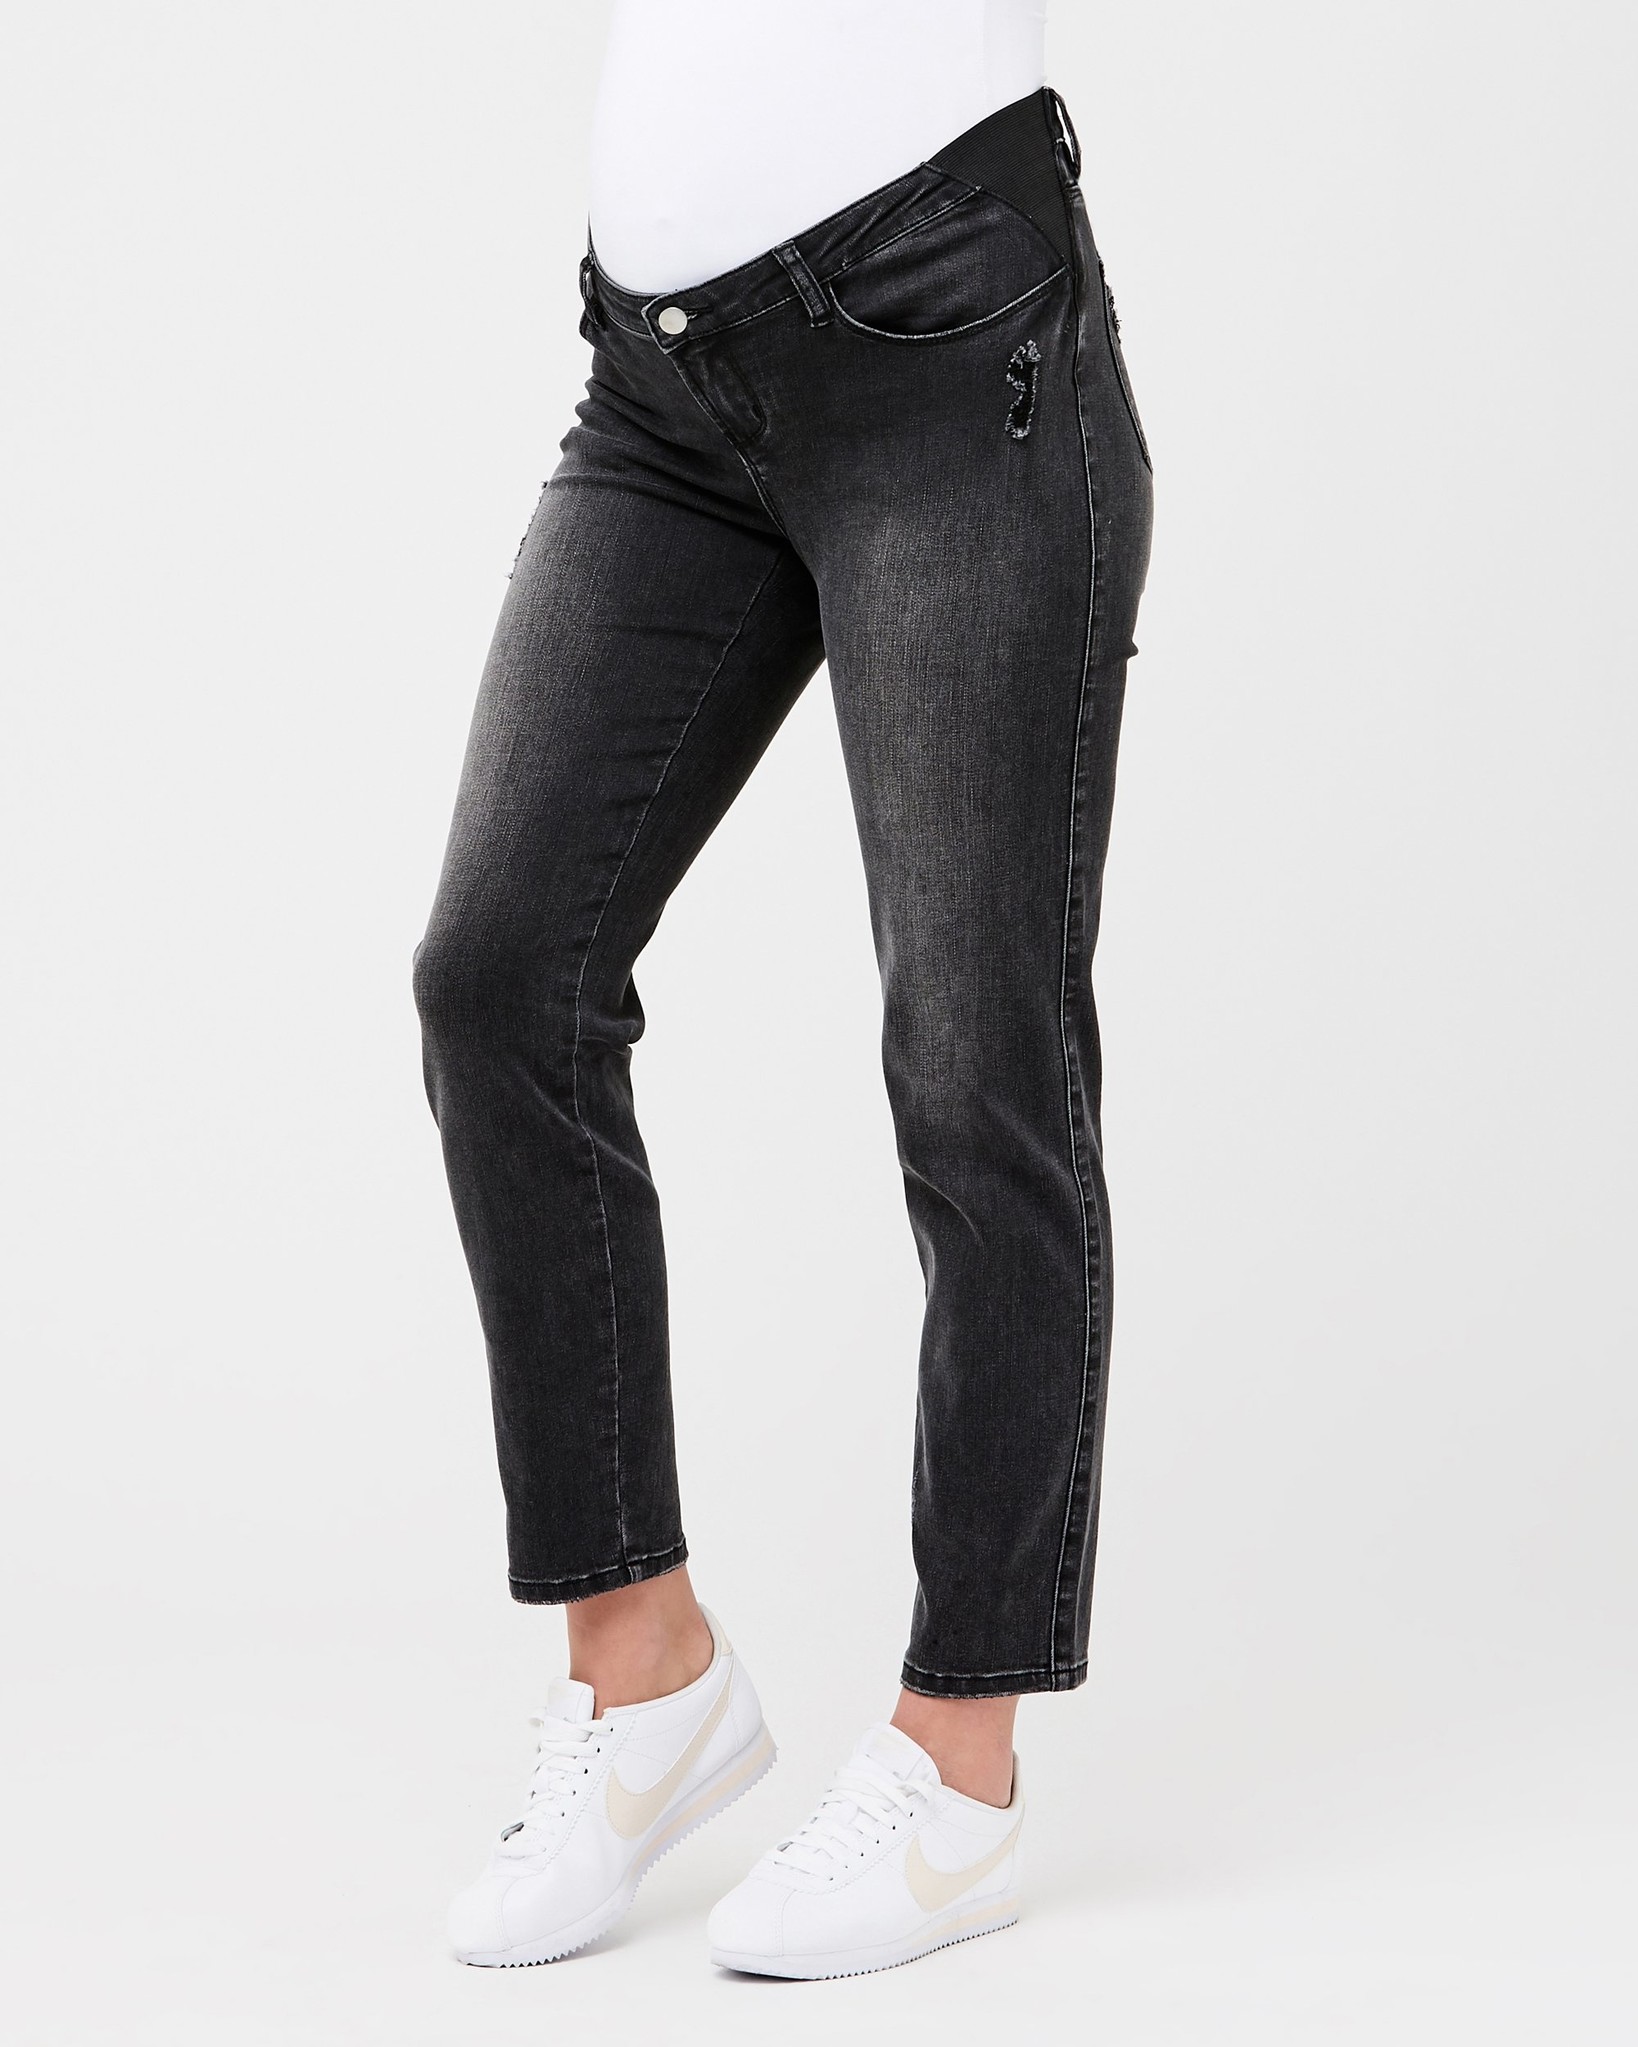 Ripe Maternity Ripe Maternity Inset Panel Dylan Ankle Skinnies - Black Rinse